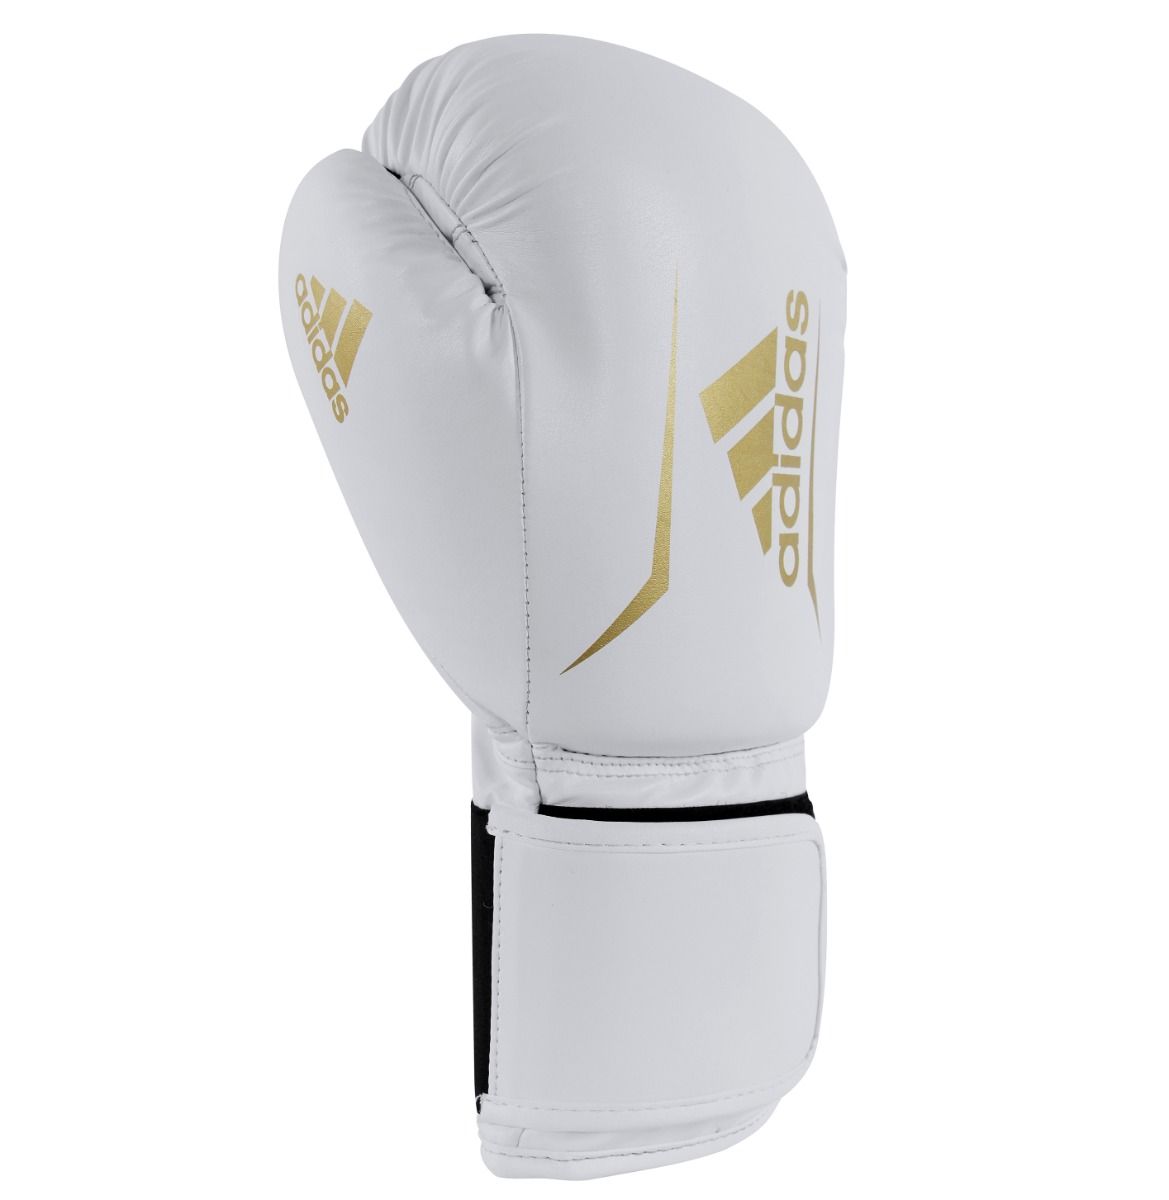 ADIDAS SPEED 50 BOXING GLOVES